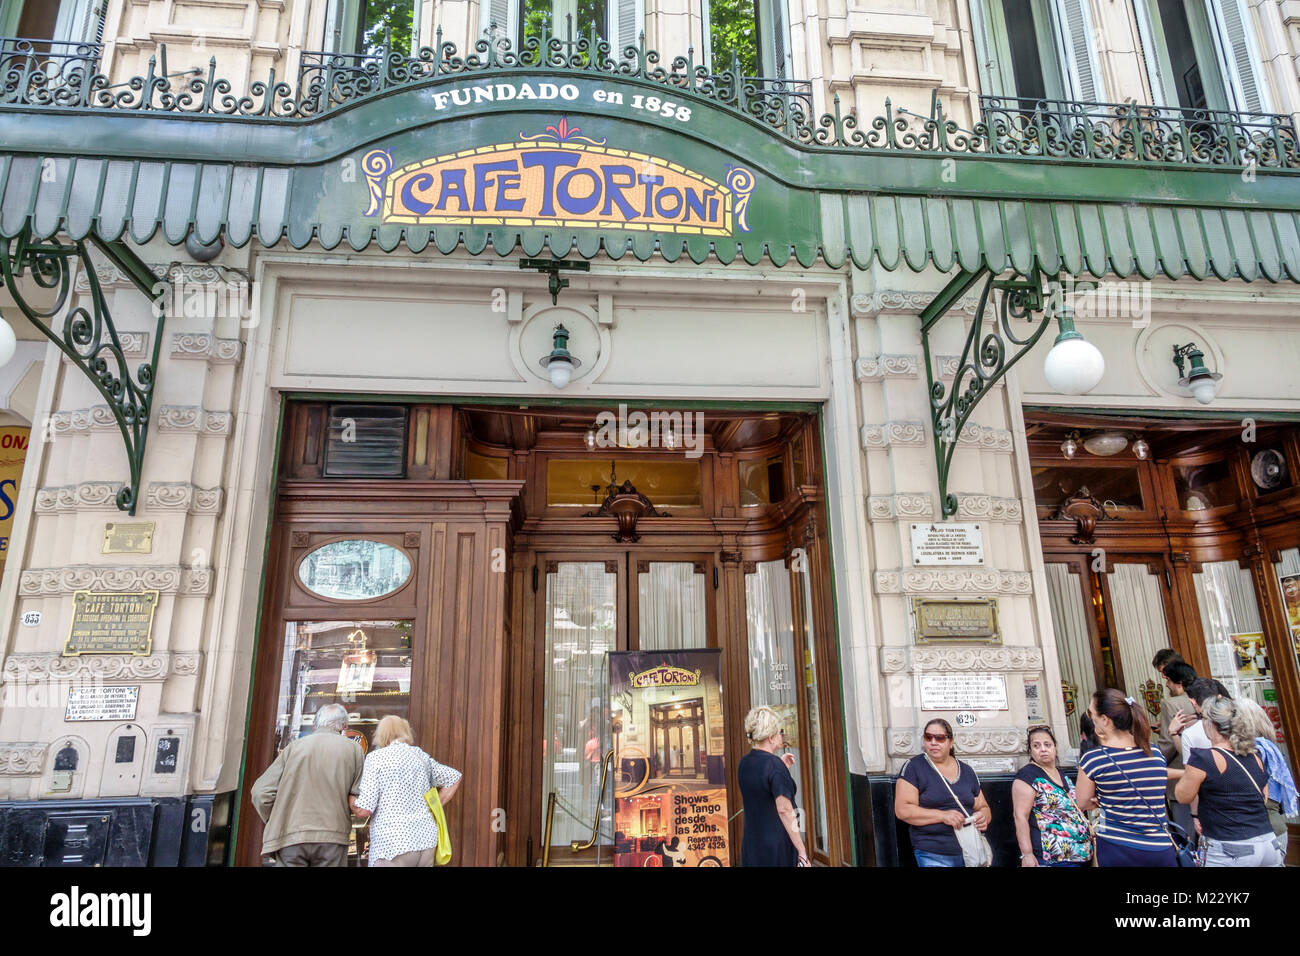 Buenos Aires Argentina,Cafe Tortoni,landmark,iconic coffeehouse,restaurant restaurants food dining cafe cafes,exterior outside front entrance,line,que Stock Photo